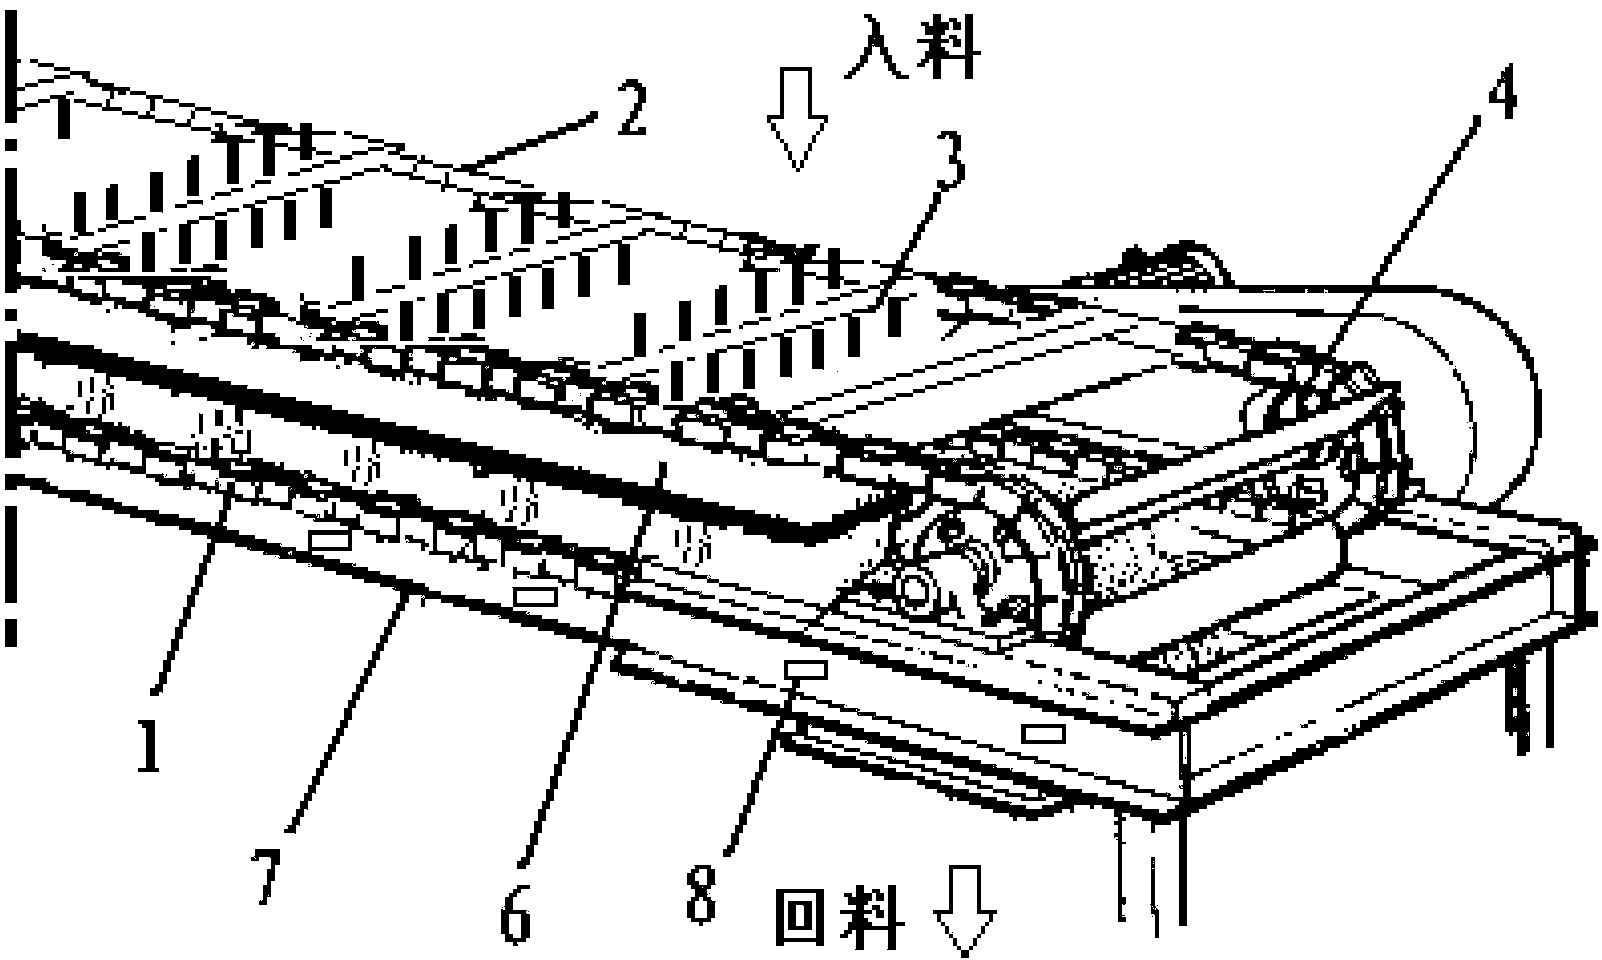 Rake-toothed biomass material conveying device